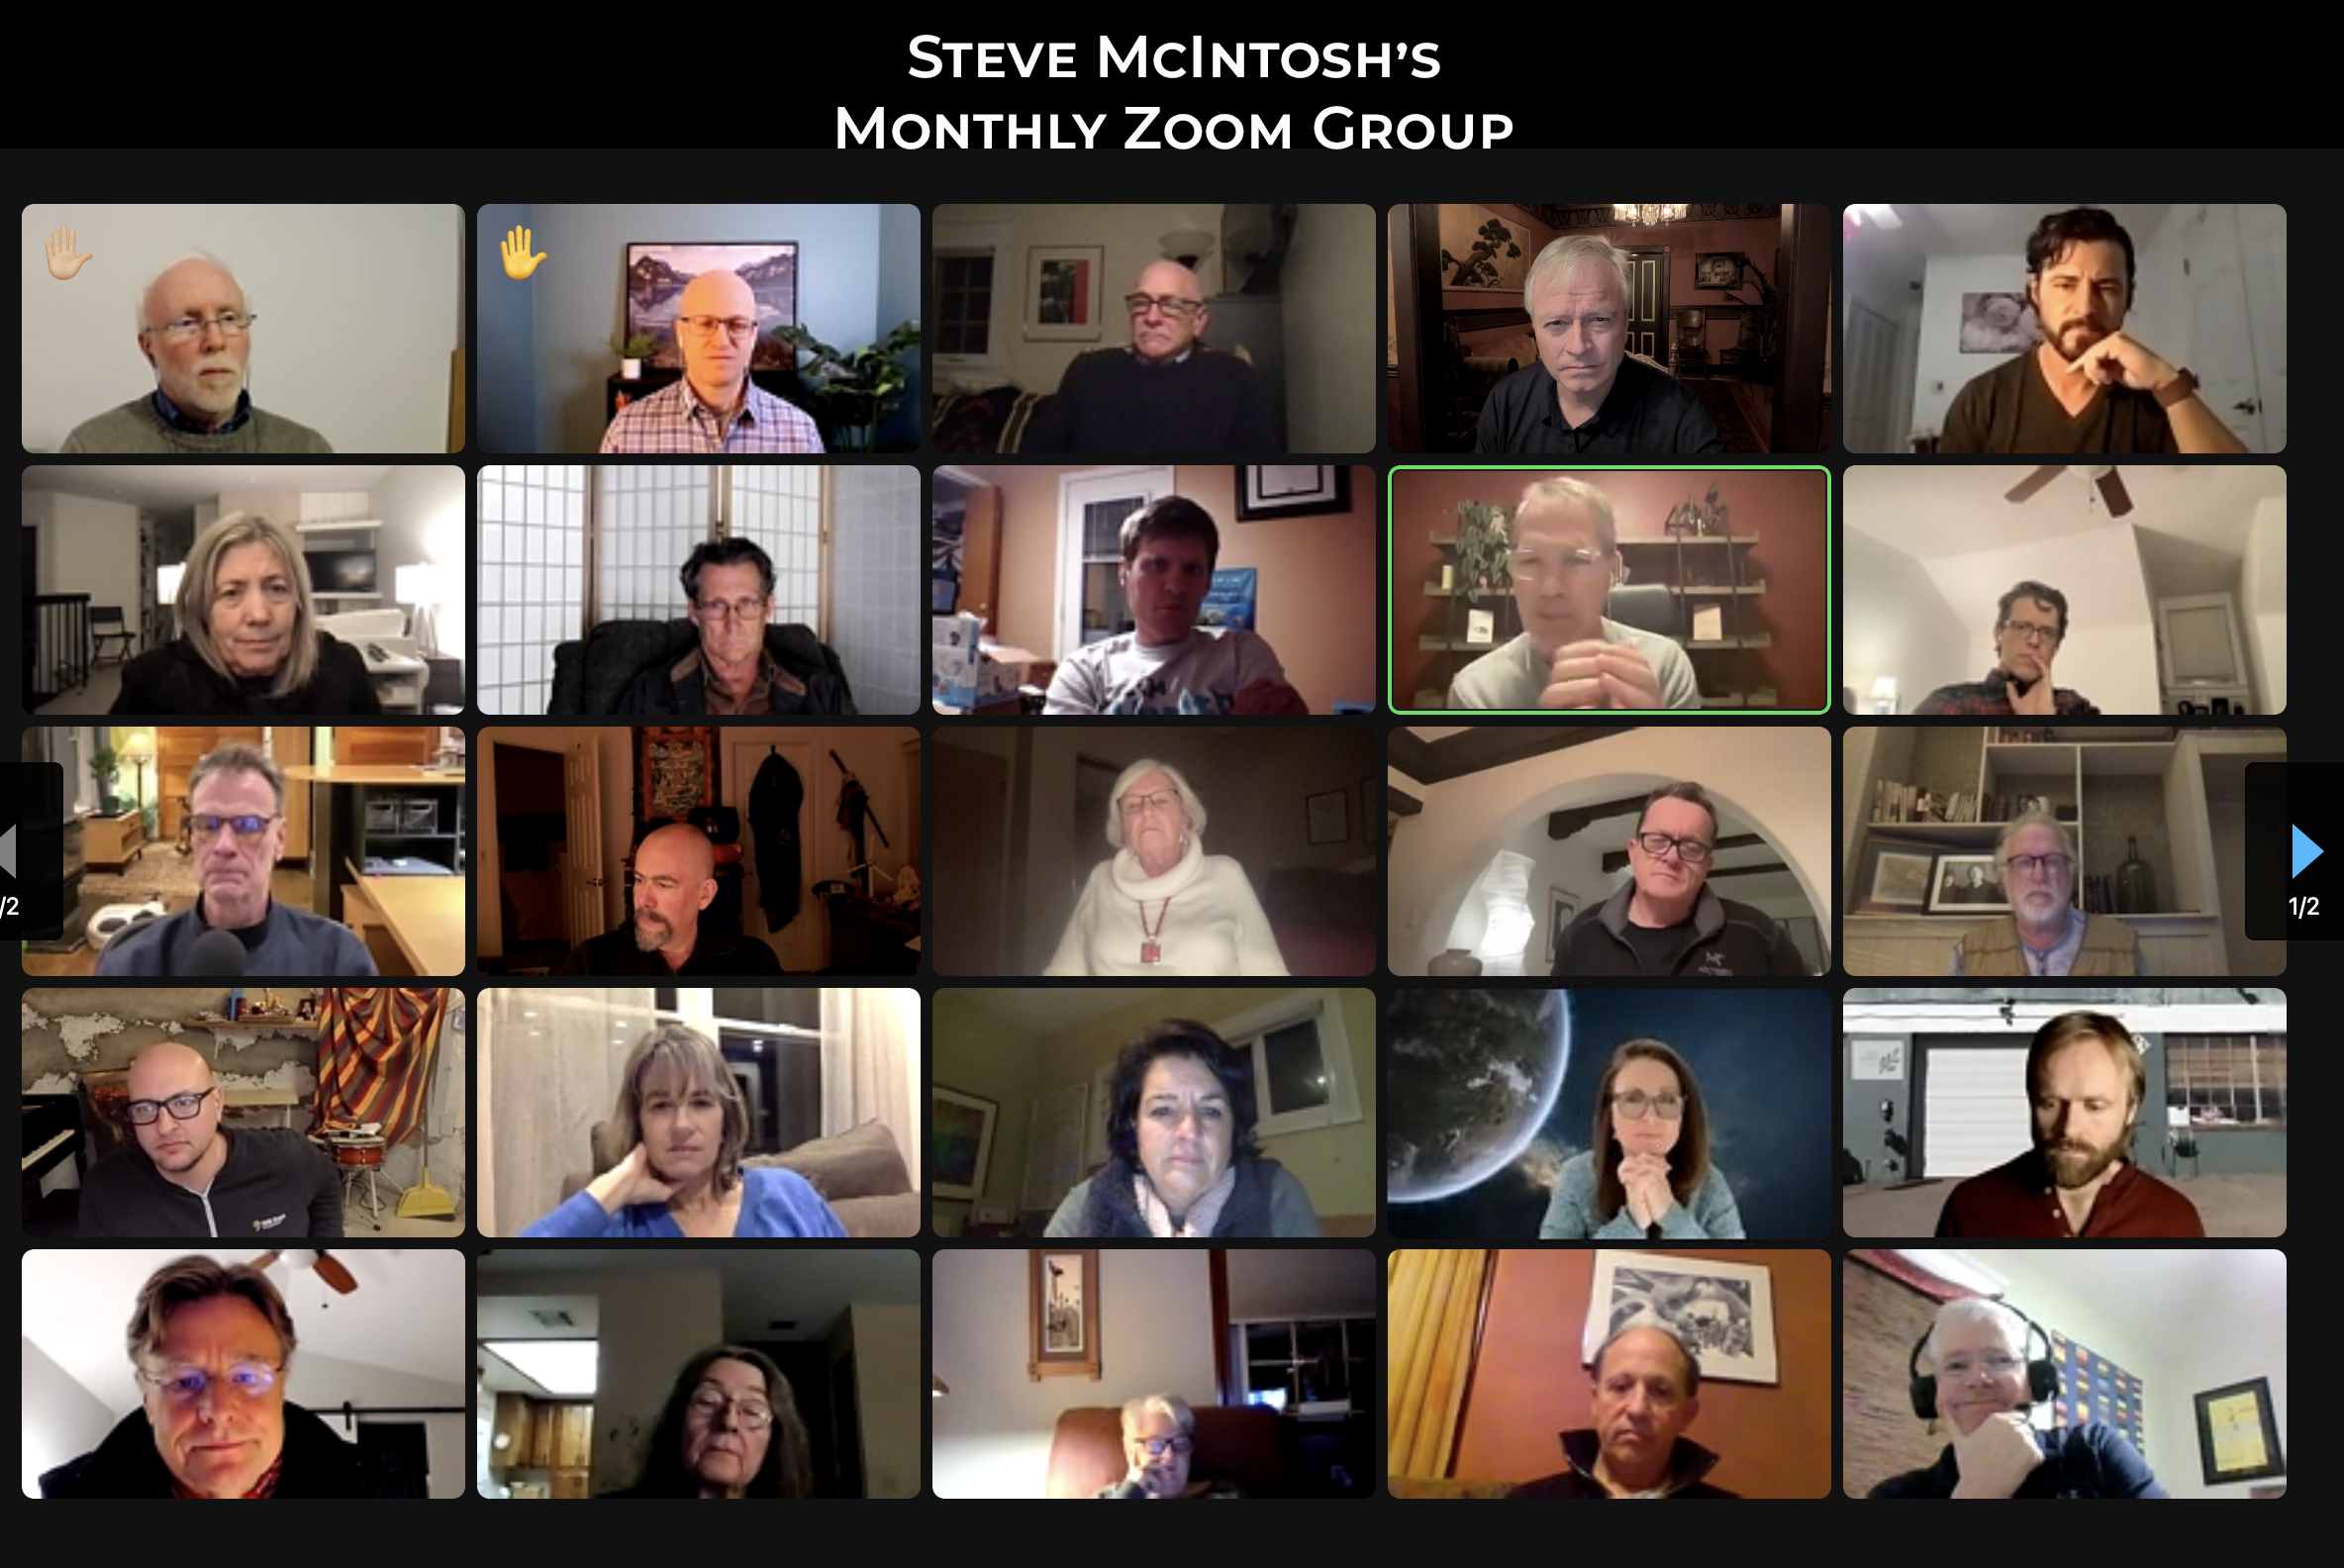 Join Steve McIntosh's Monthly Zoom Group